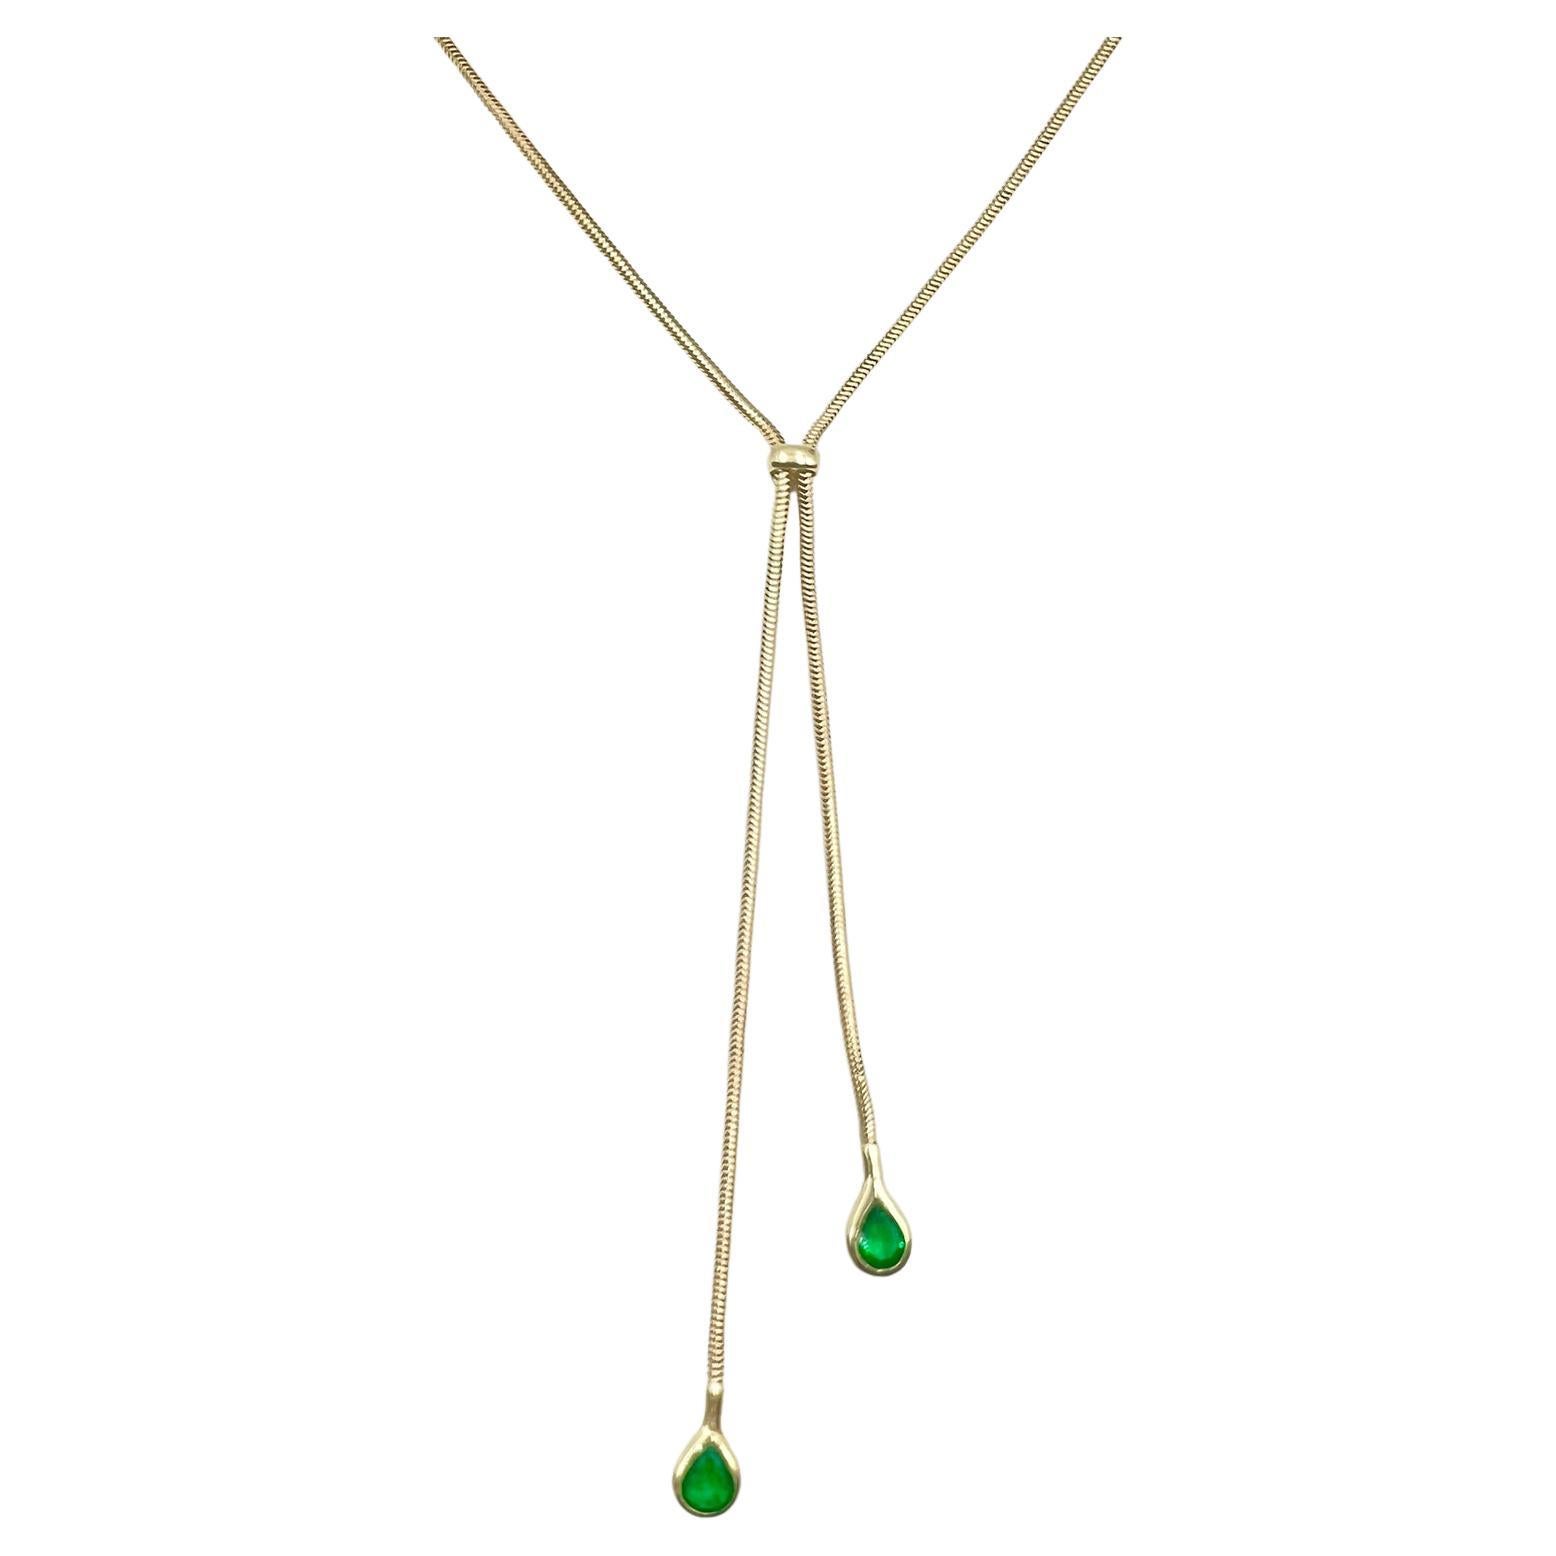 Tiffany & Co. 18k yellow gold snake design link necklace joined in the center with a polished band wrap which adjusts in length for the neck.  Two bezel-set pear-shaped faceted natural Colombian emeralds, in a vibrant green color, adorn the tips. 